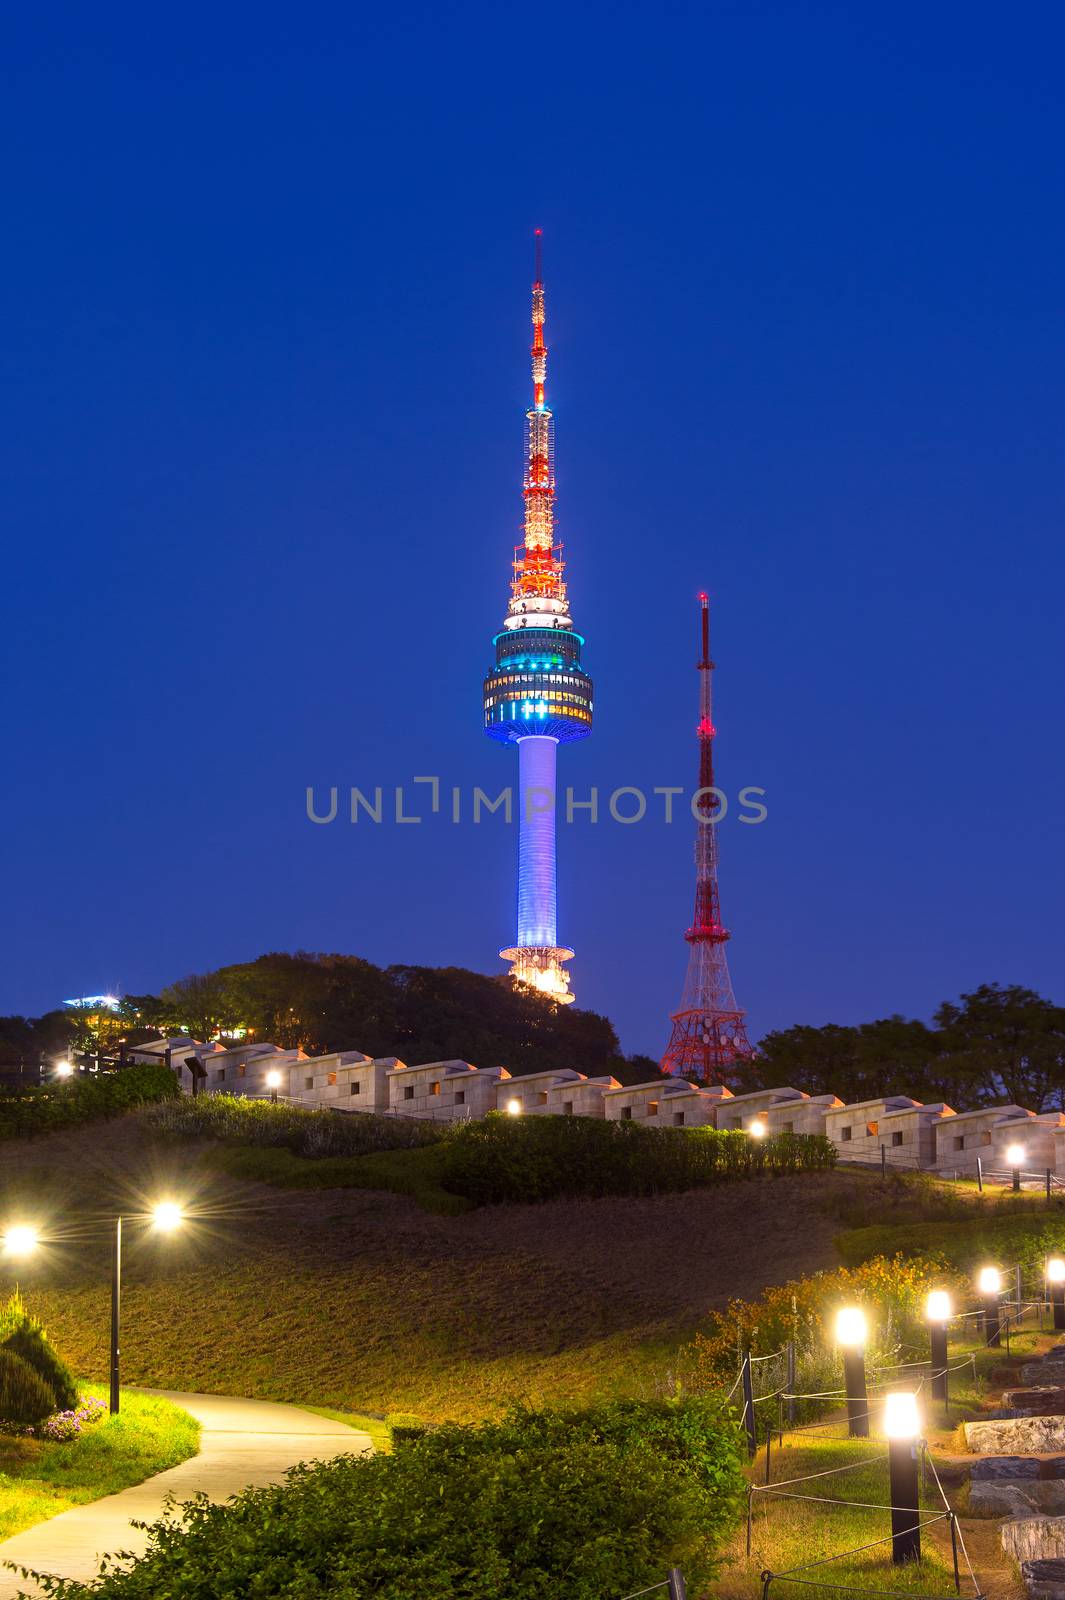 N Seoul Tower Located on Namsan Mountain in central Seoul,South Korea. by gutarphotoghaphy